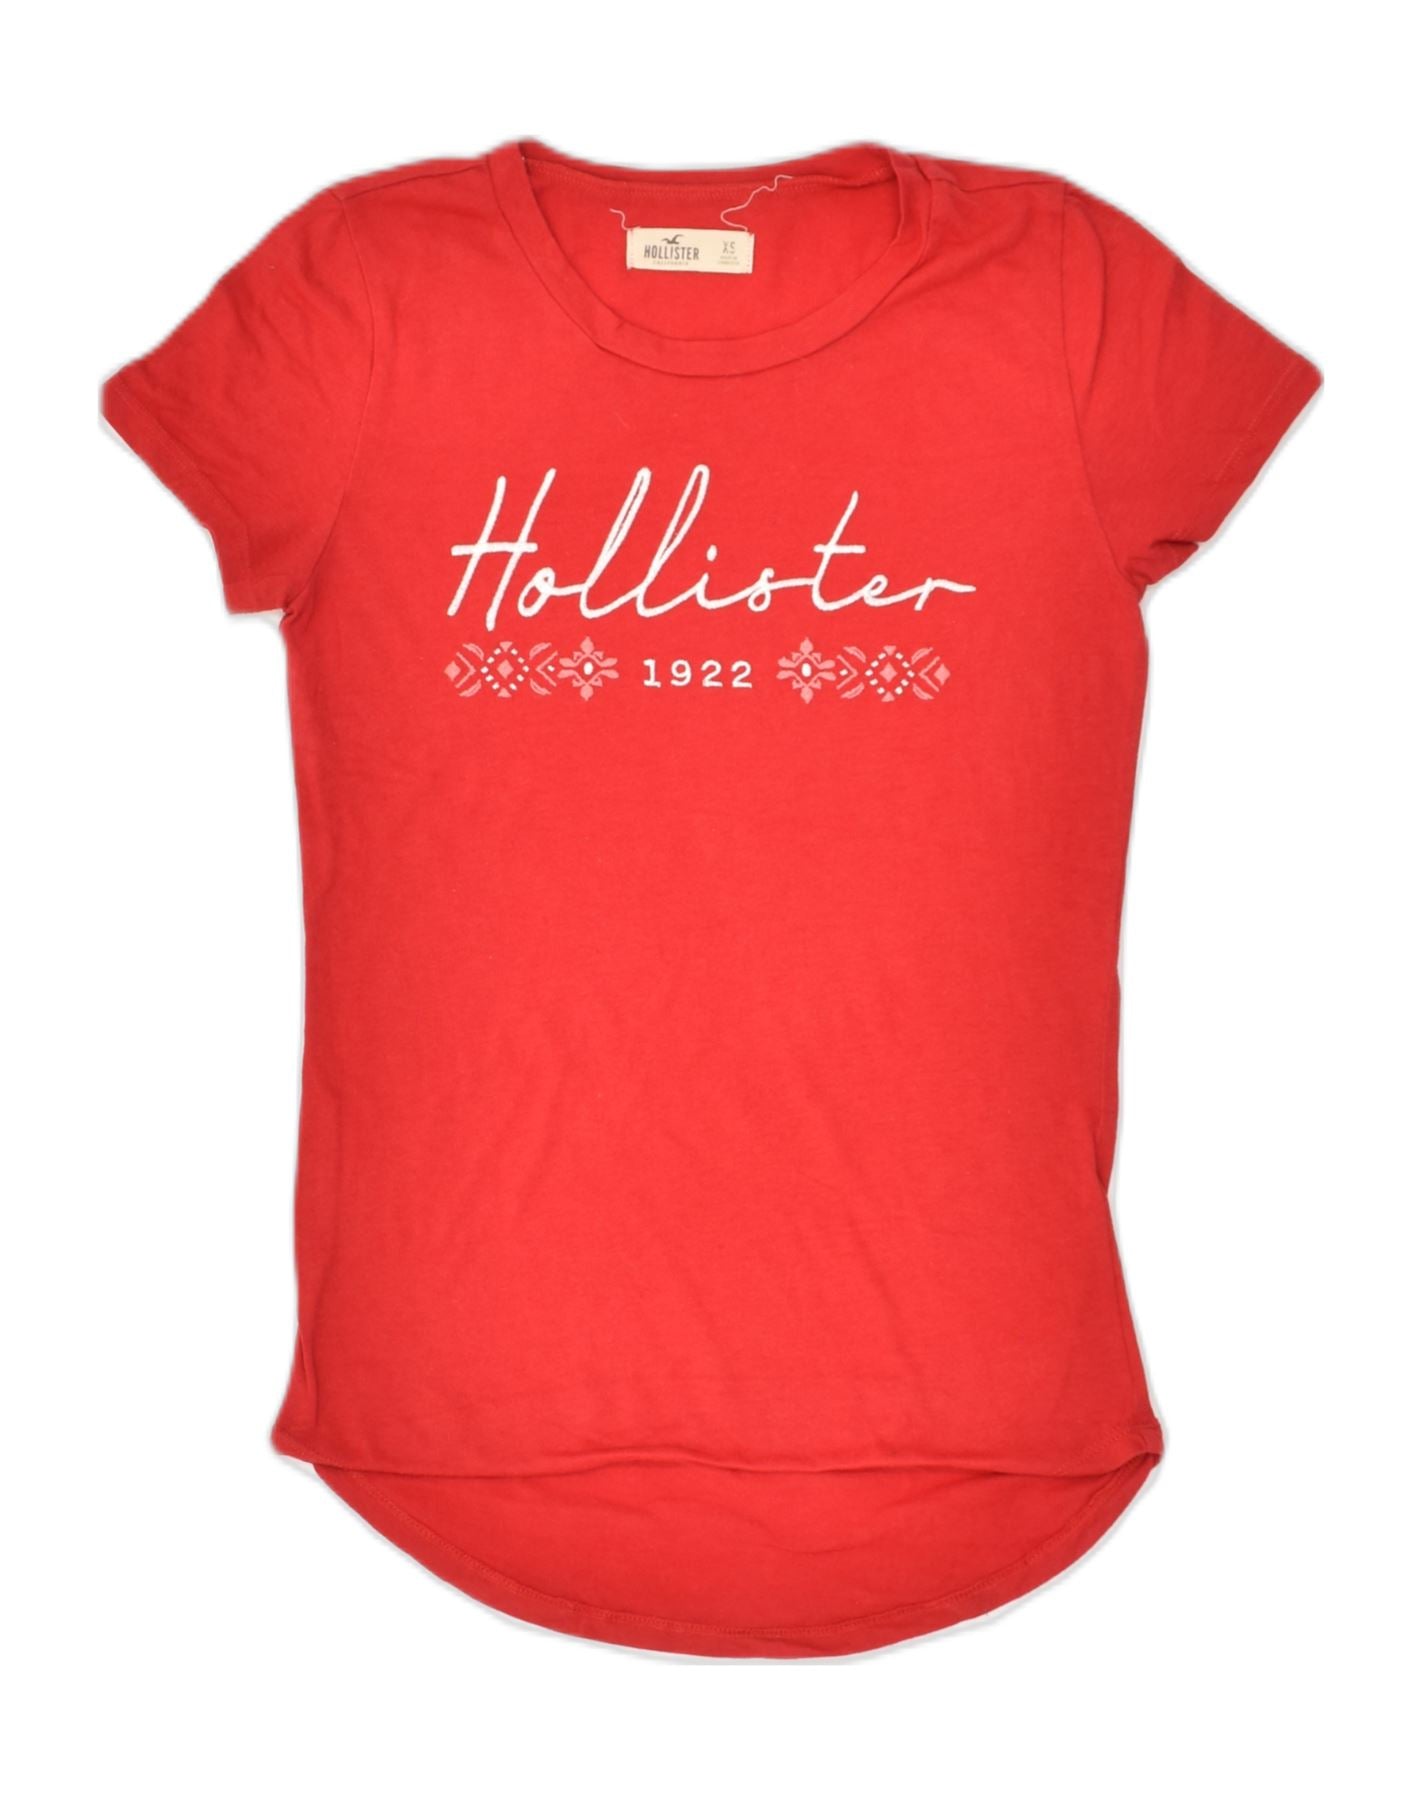 HOLLISTER Womens California Graphic T-Shirt Top UK 6 XS Red Cotton, Vintage & Second-Hand Clothing Online